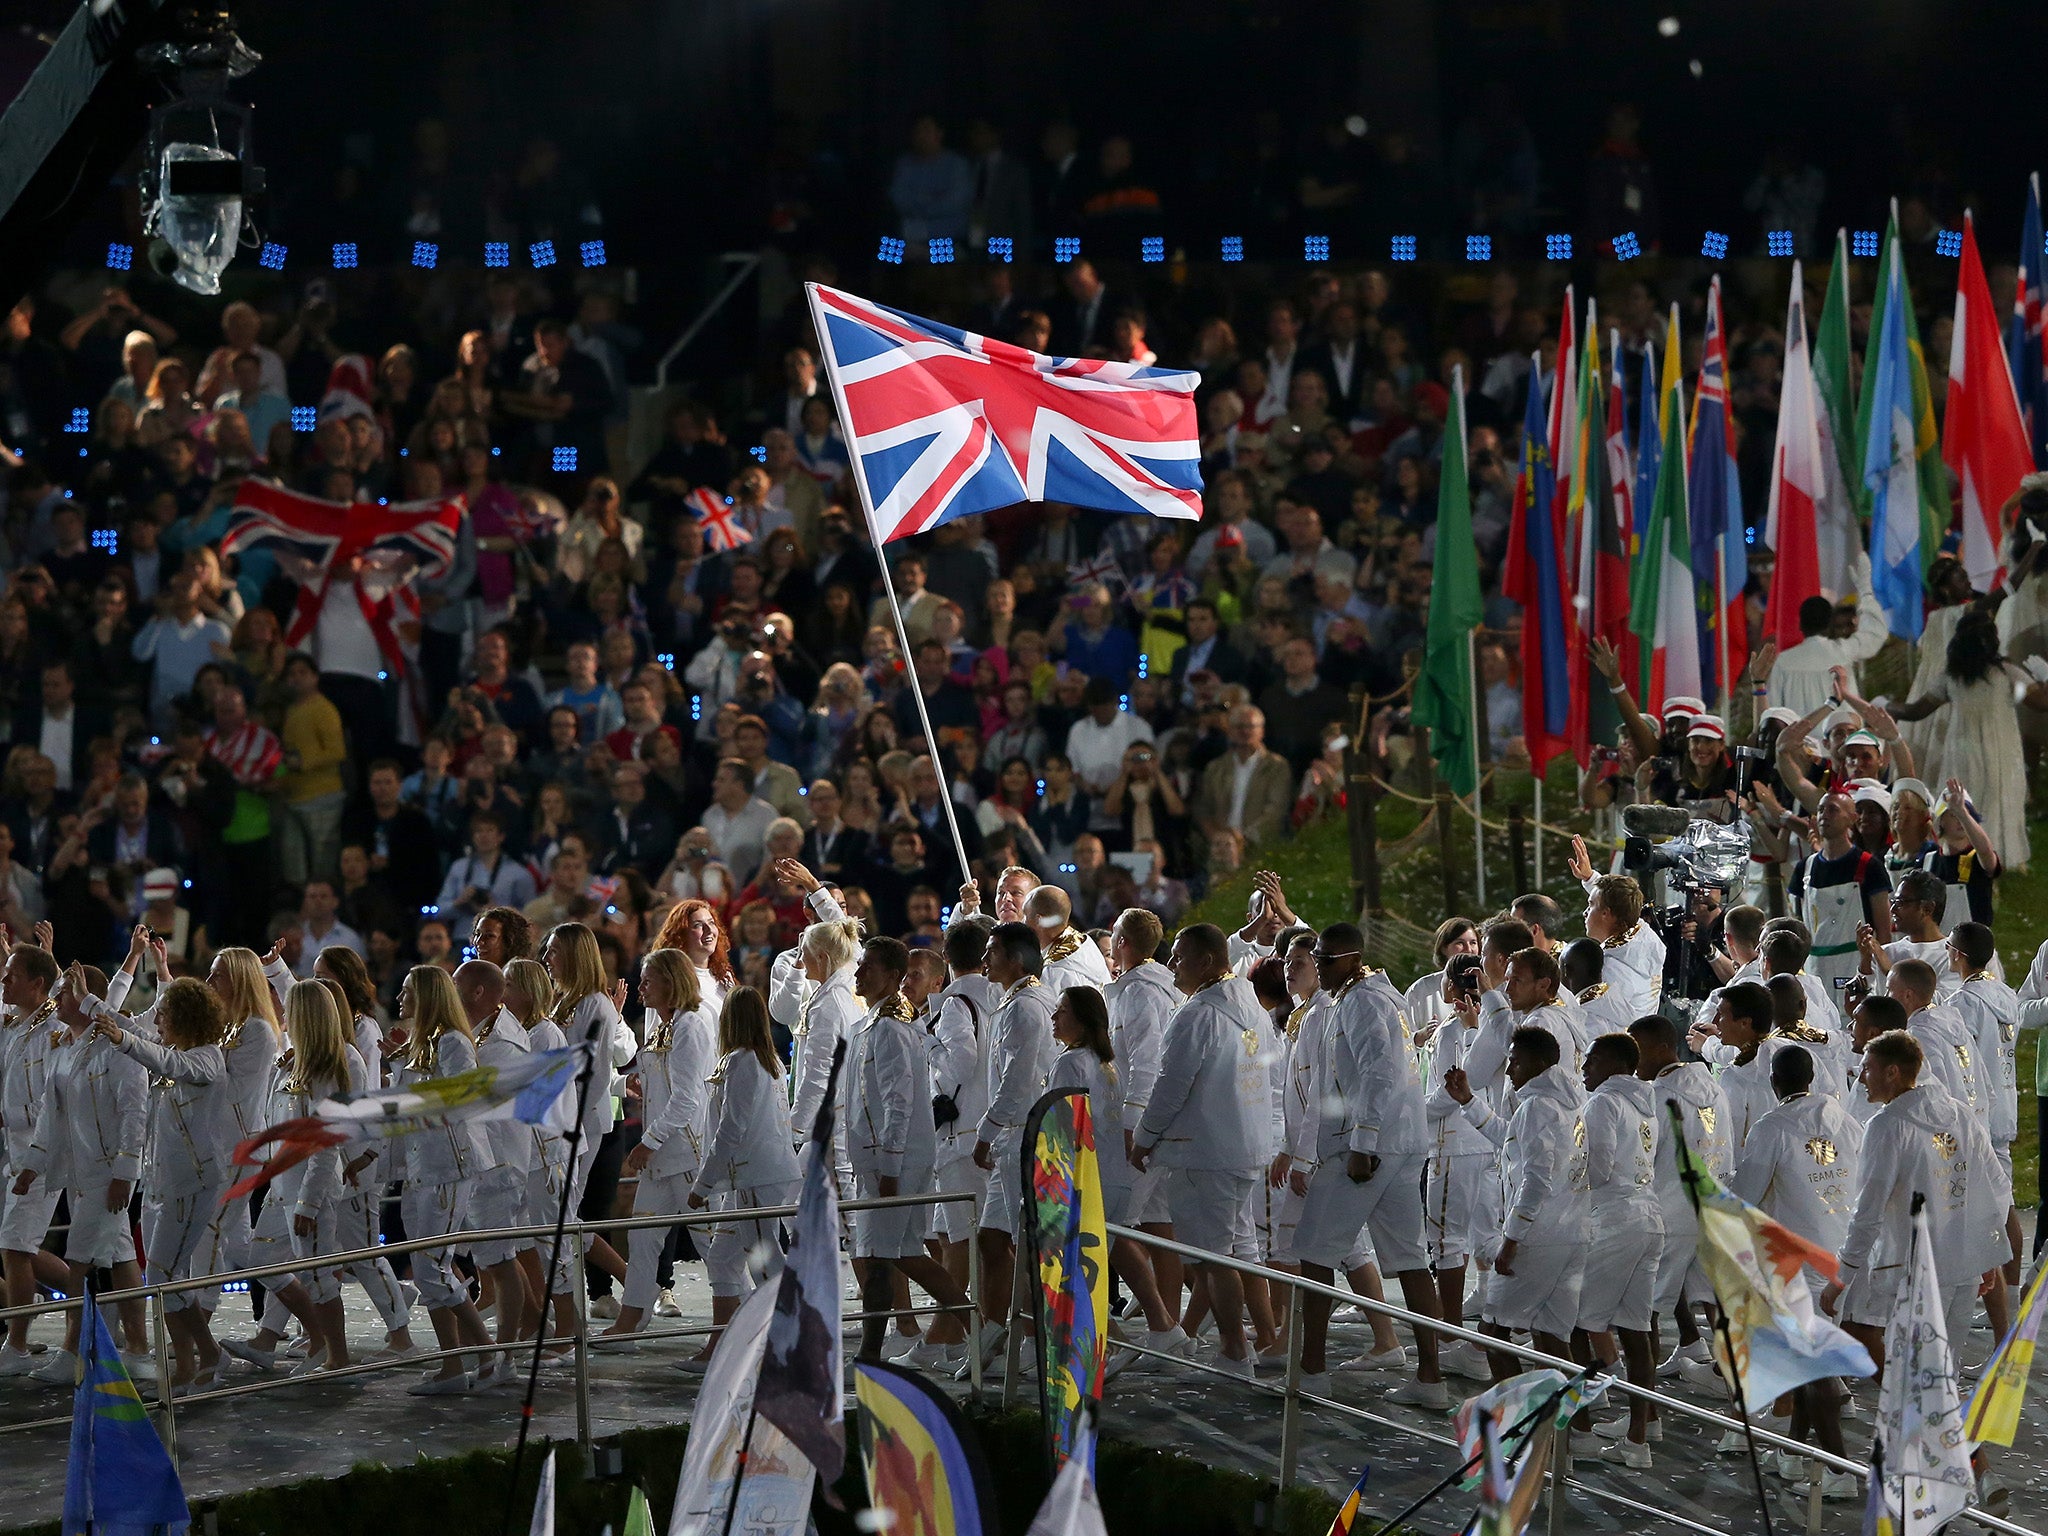 Sir Chris Hoy was chosen to bear the flag at the London 2012 Games